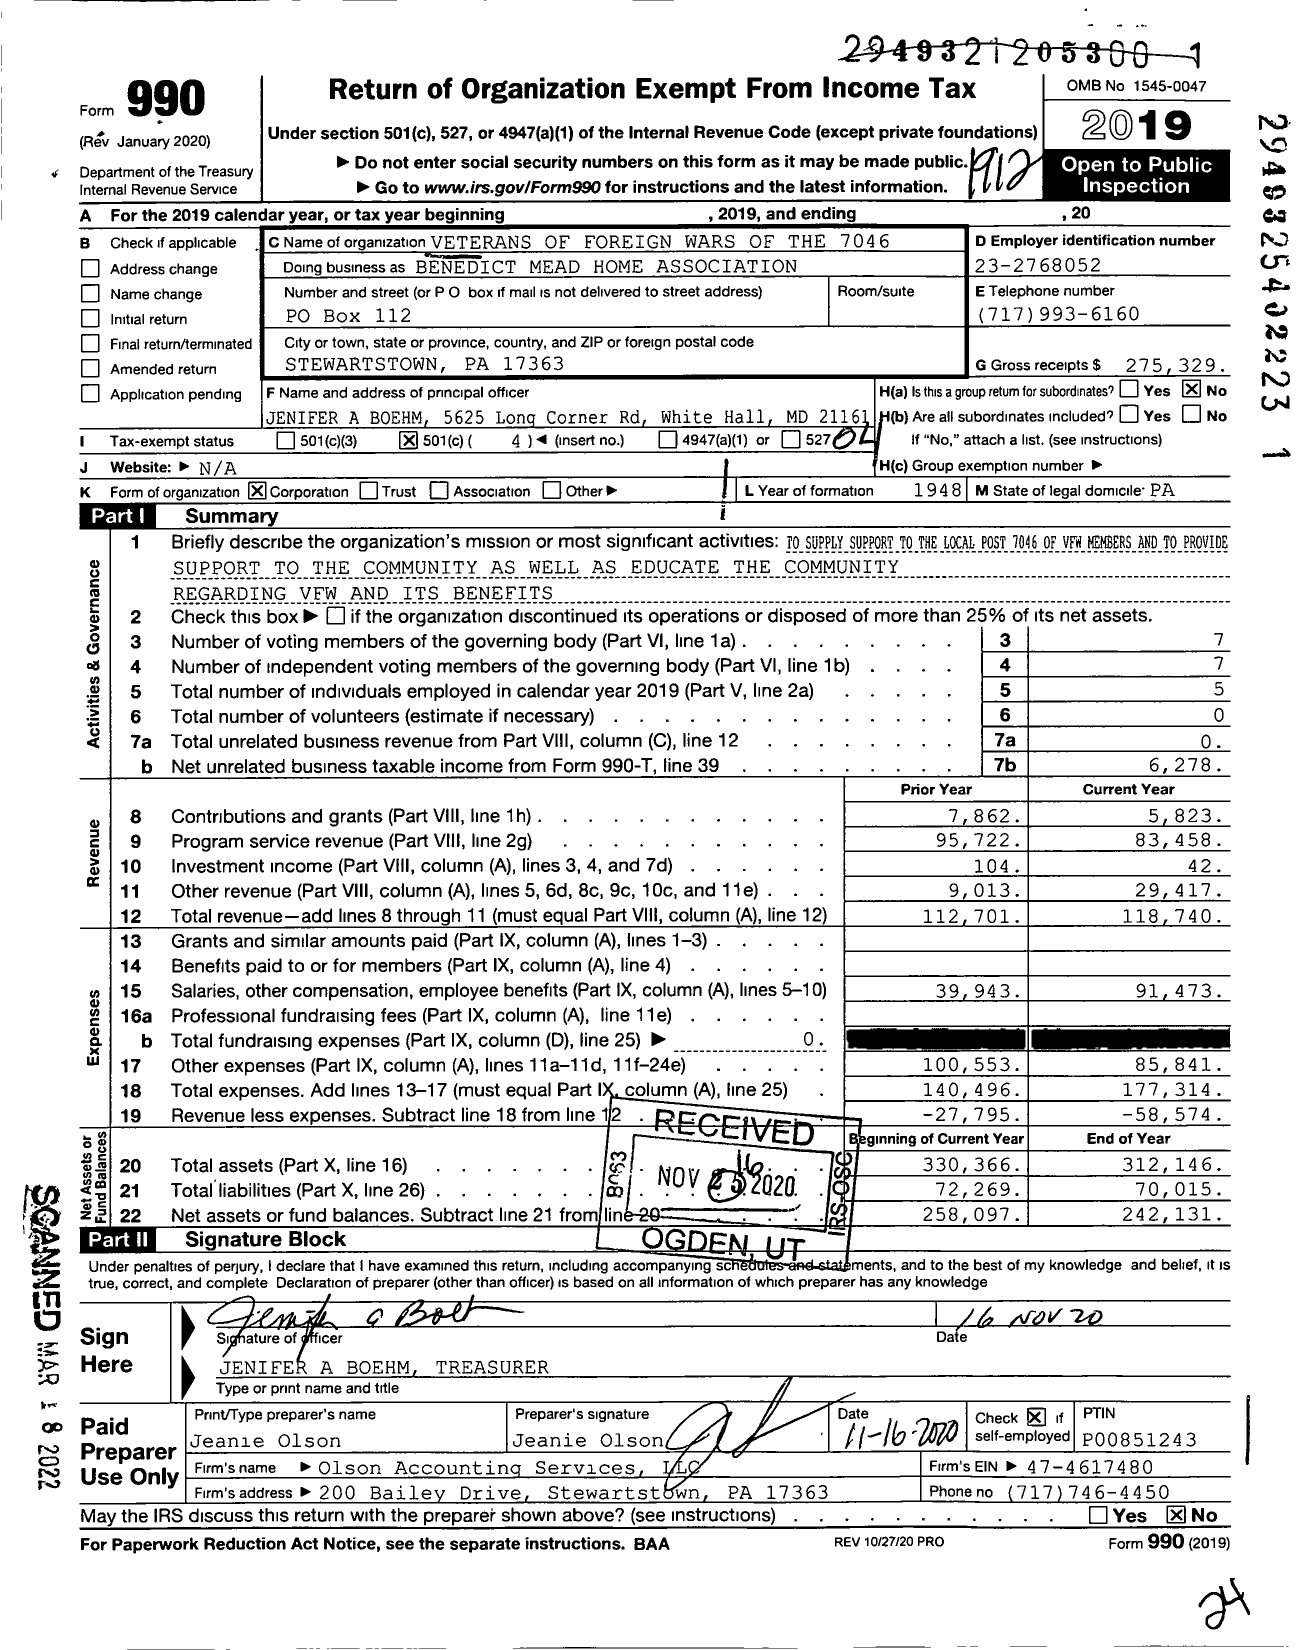 Image of first page of 2019 Form 990O for VFW Department of Pennsylvania - Benedict Mead Home Association